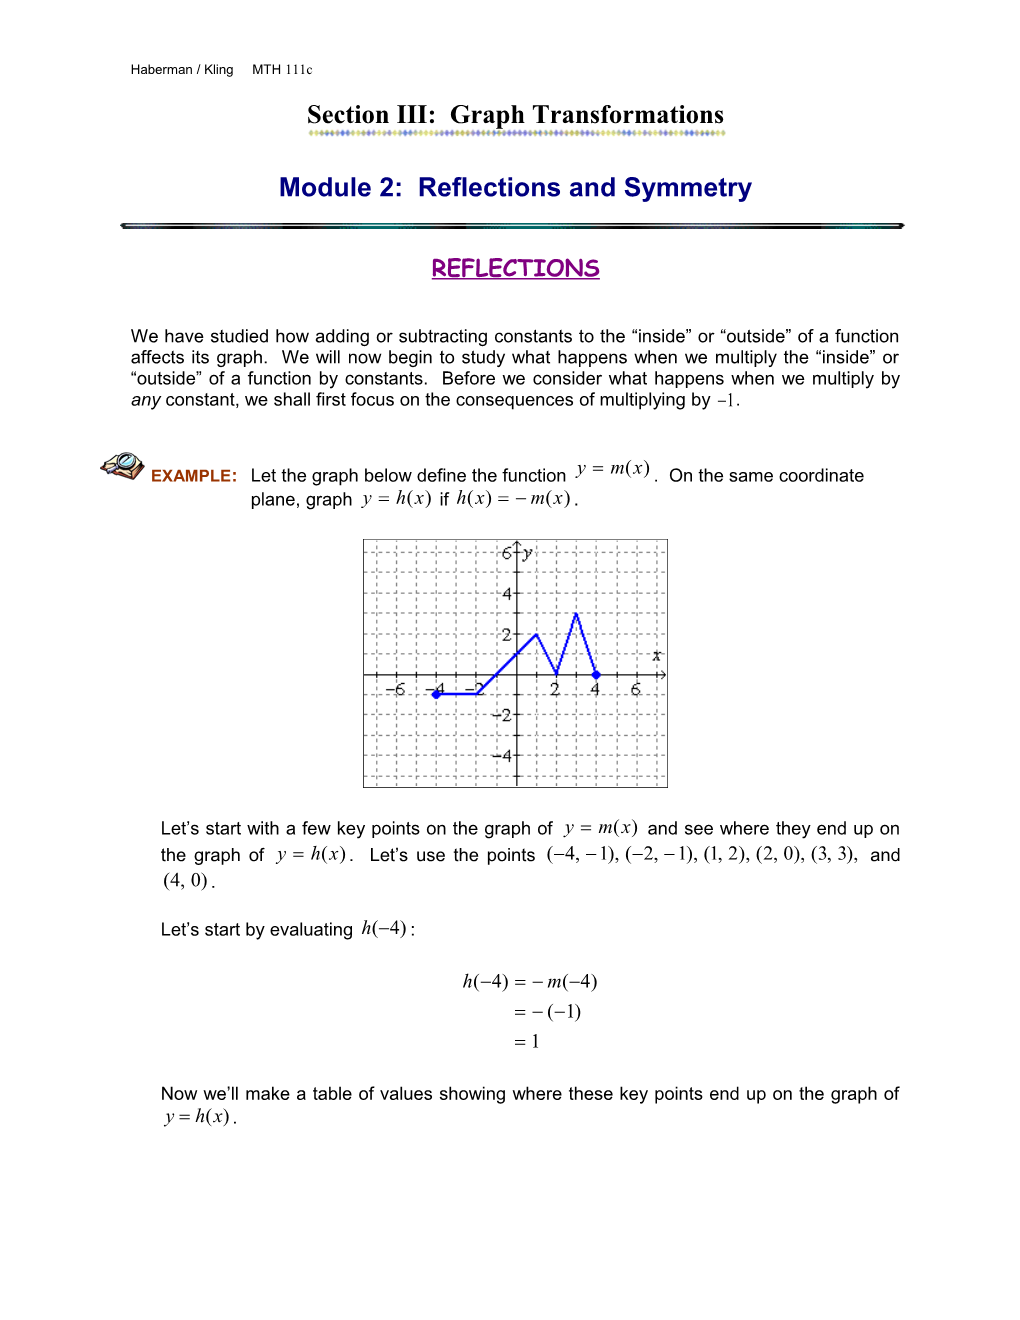 Module 2: Reflections and Symmetry